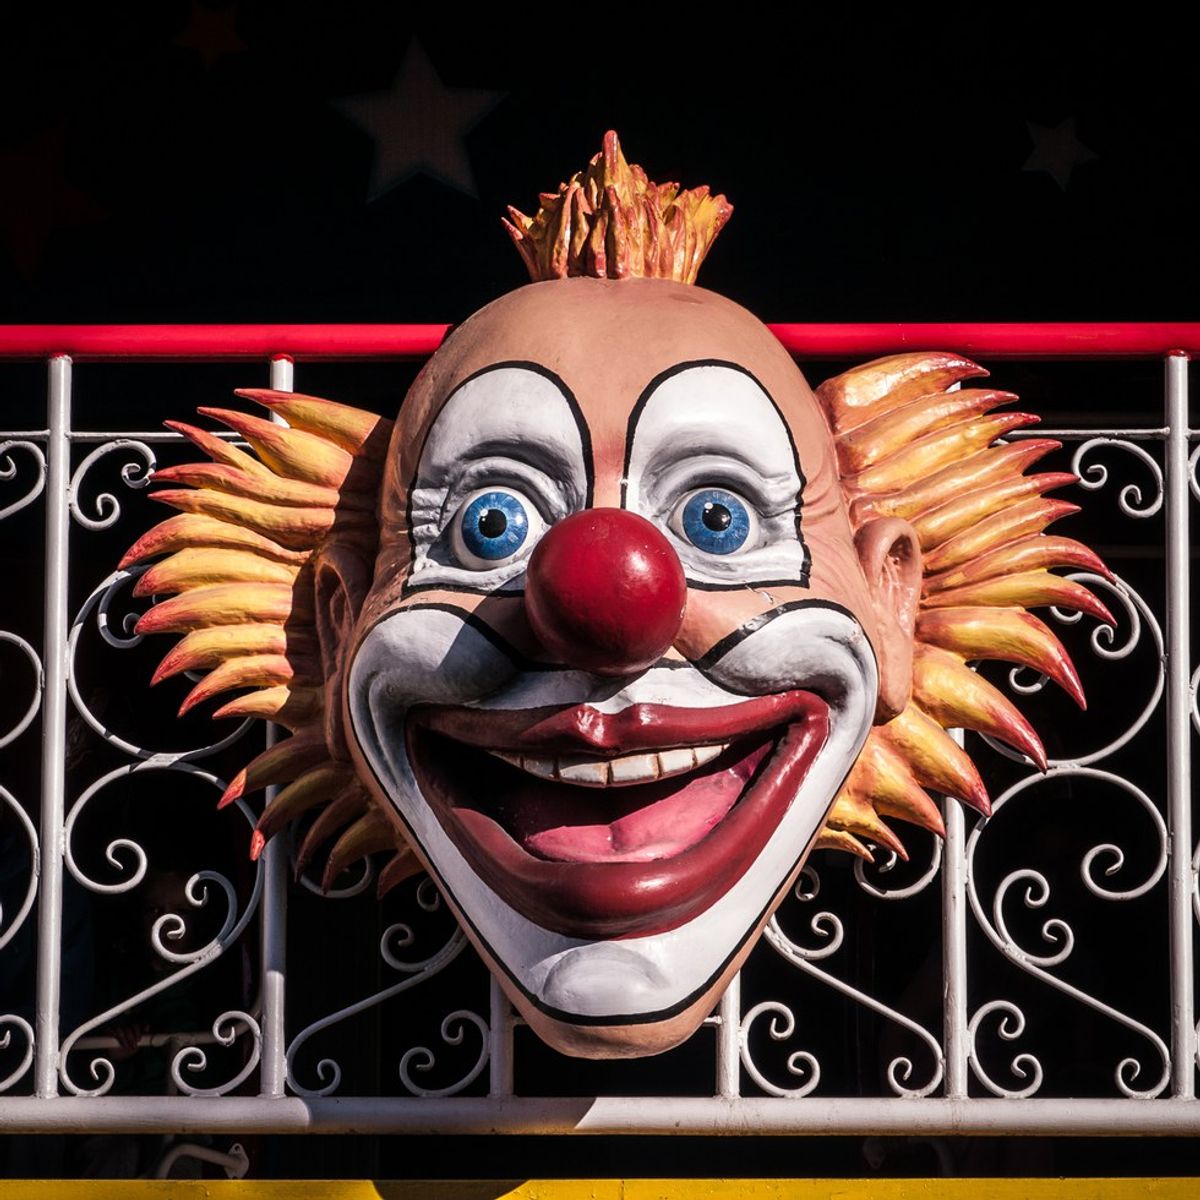 You Thought the Clowns Roaming the Streets Were Creepy? You Have No Idea.